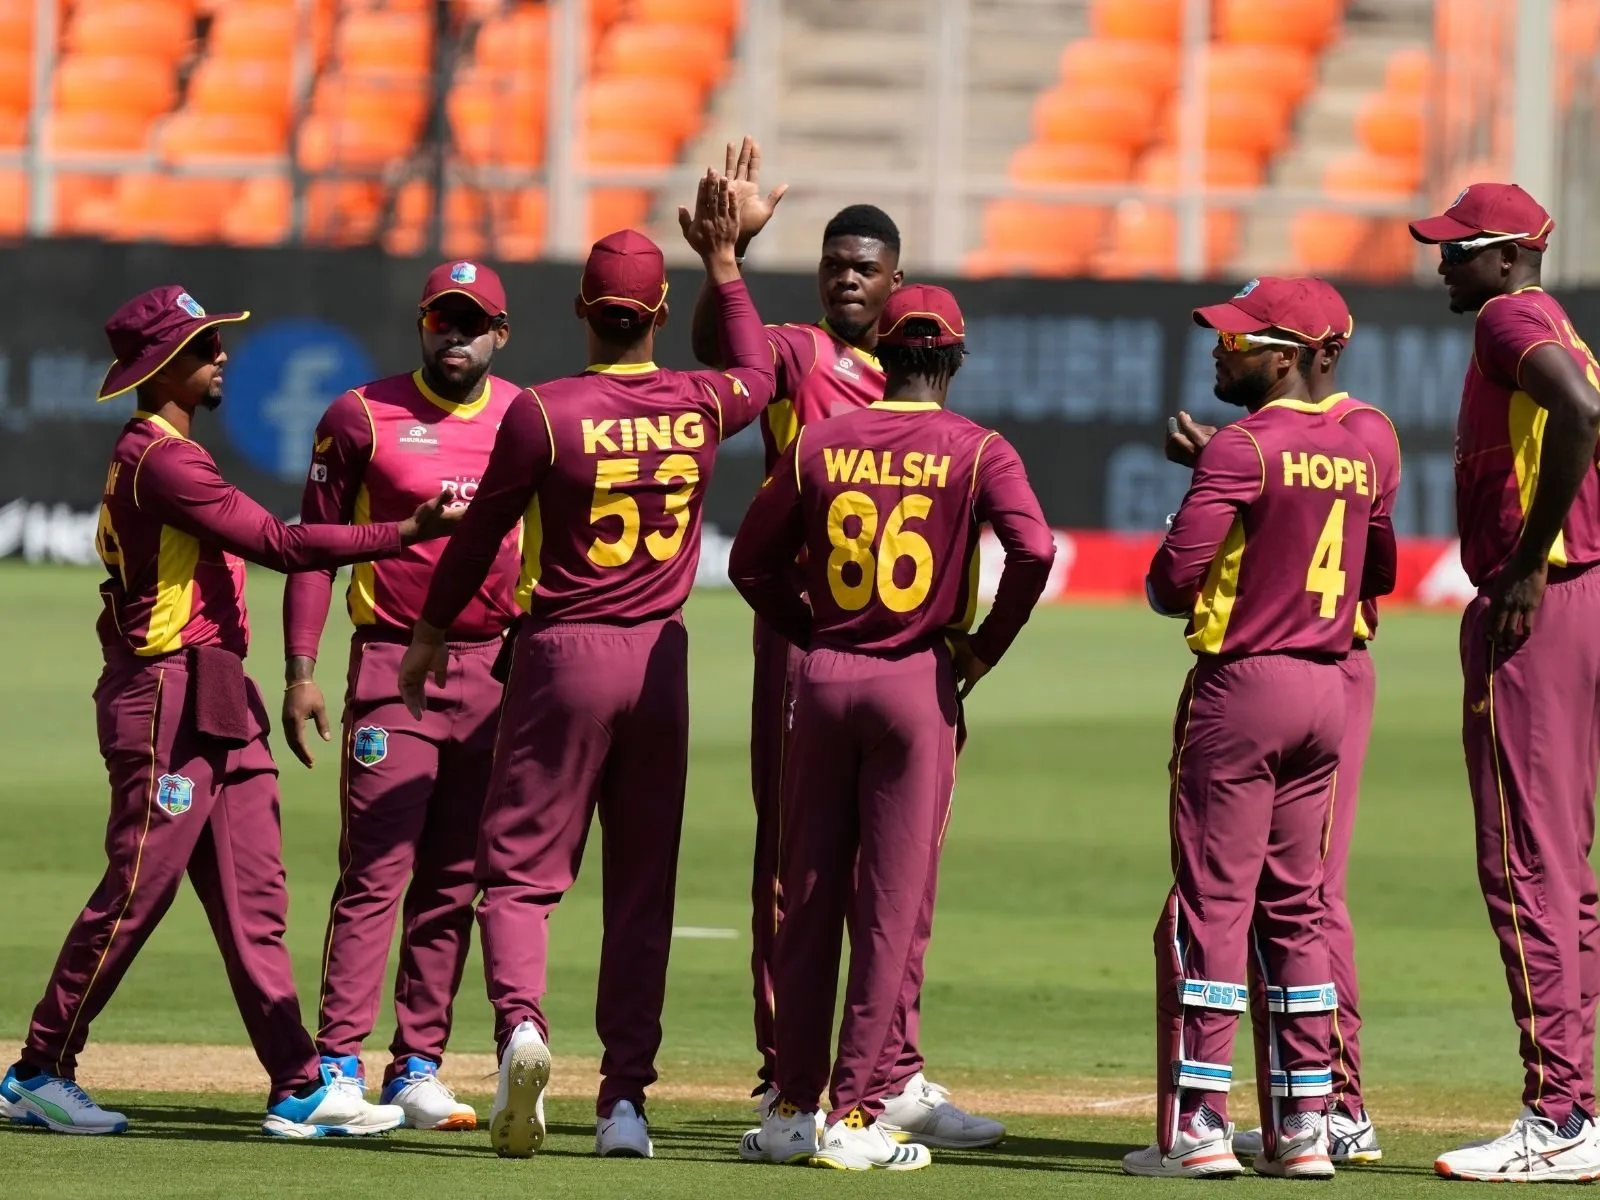 West Indies Vs India: 1st ODI Full Preview, Lineups, Pitch Report, And Dream11 Team Prediction | SportzPoint.com